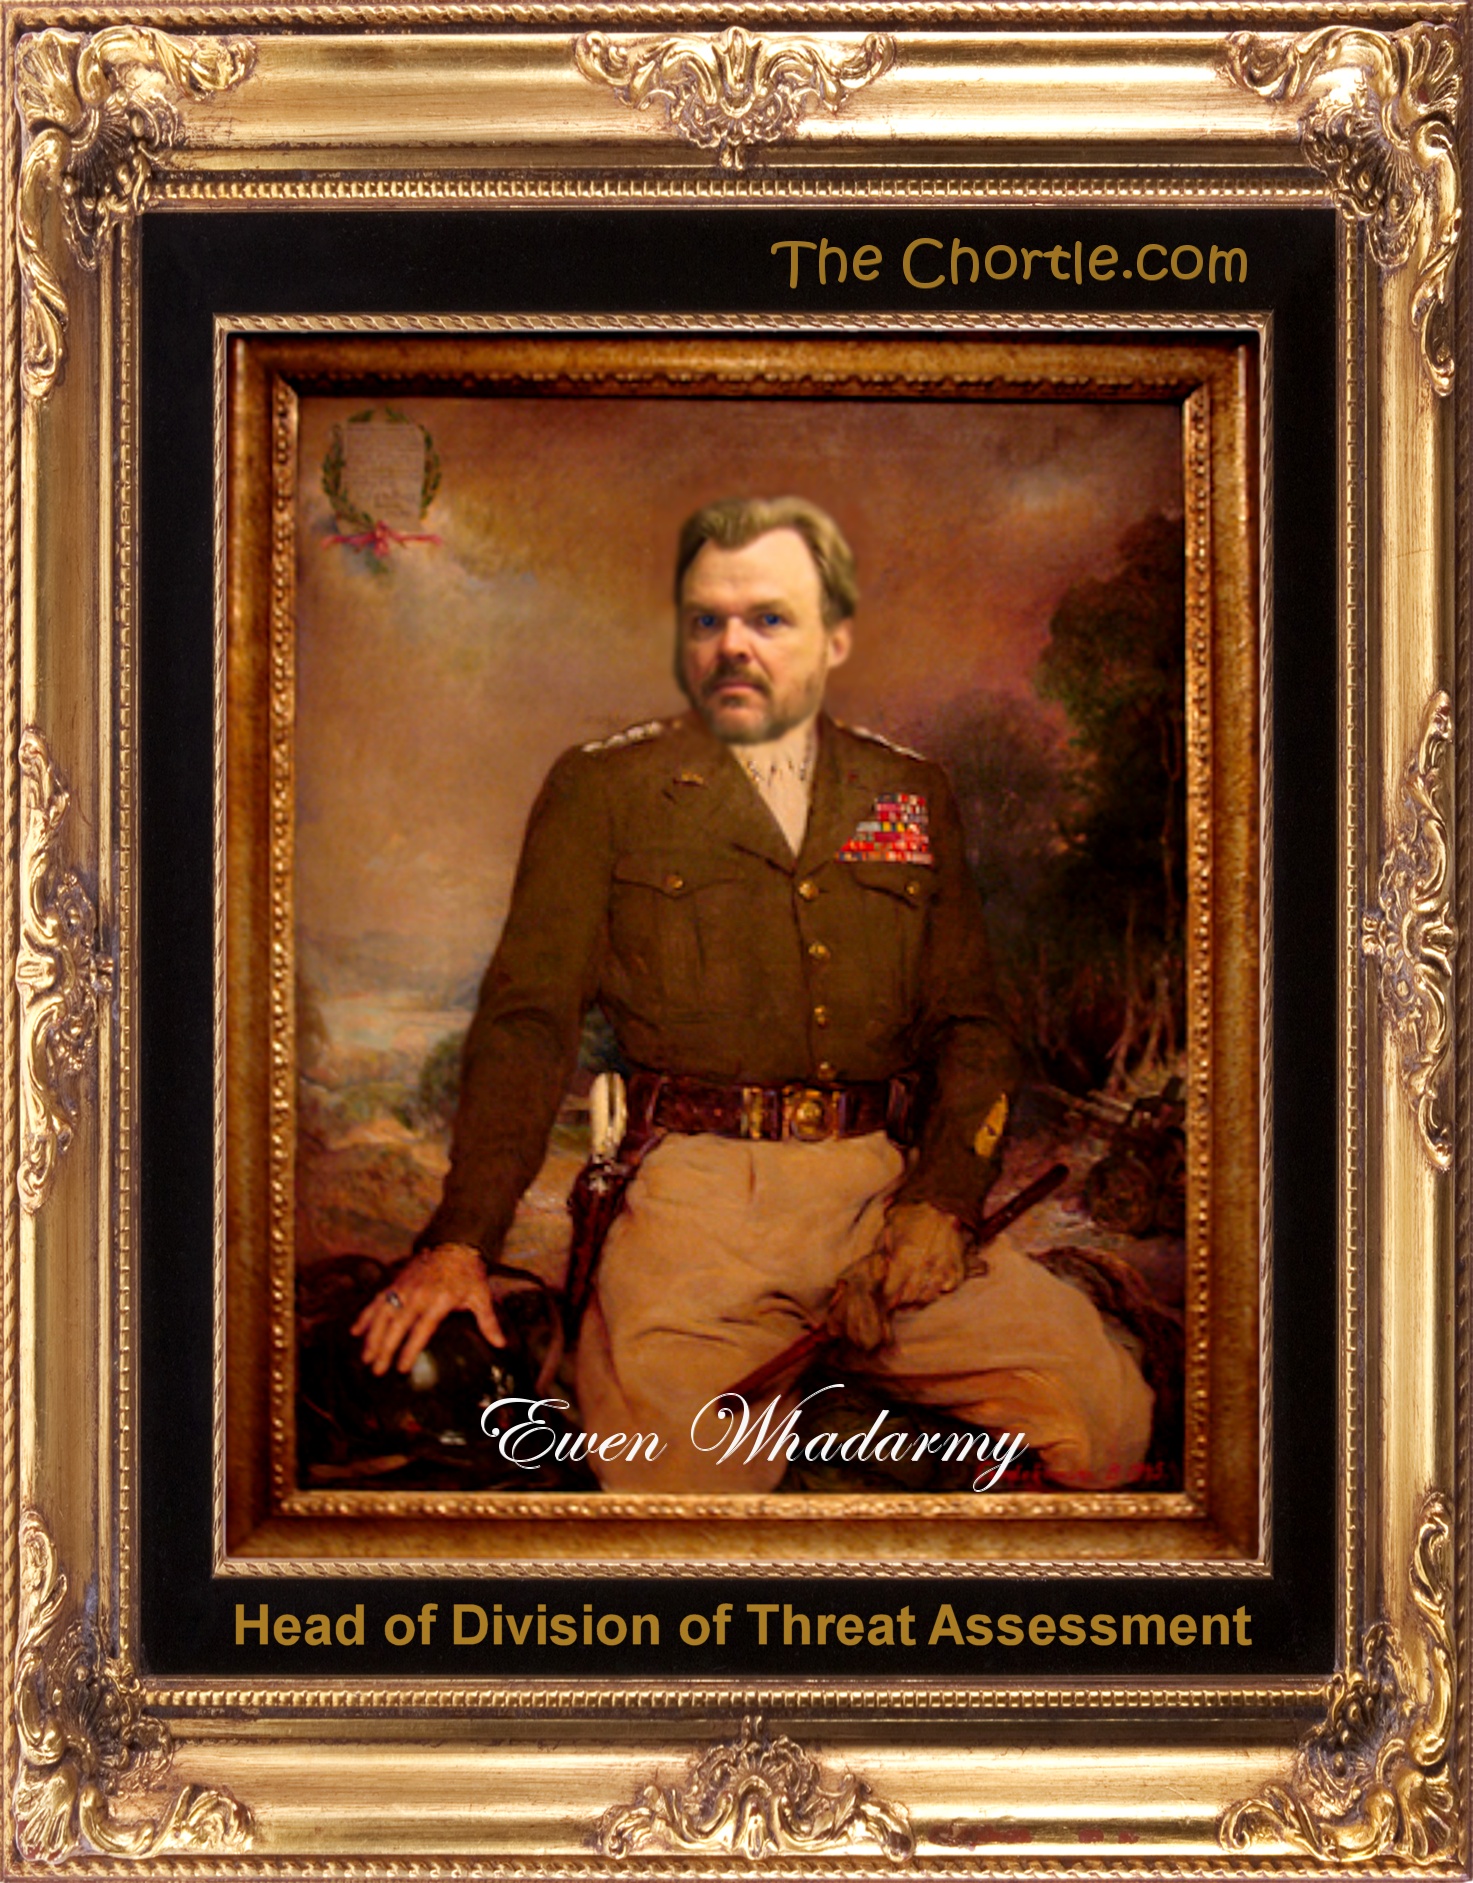 Ewen Whadarmy, Head of Division Threat Assessment